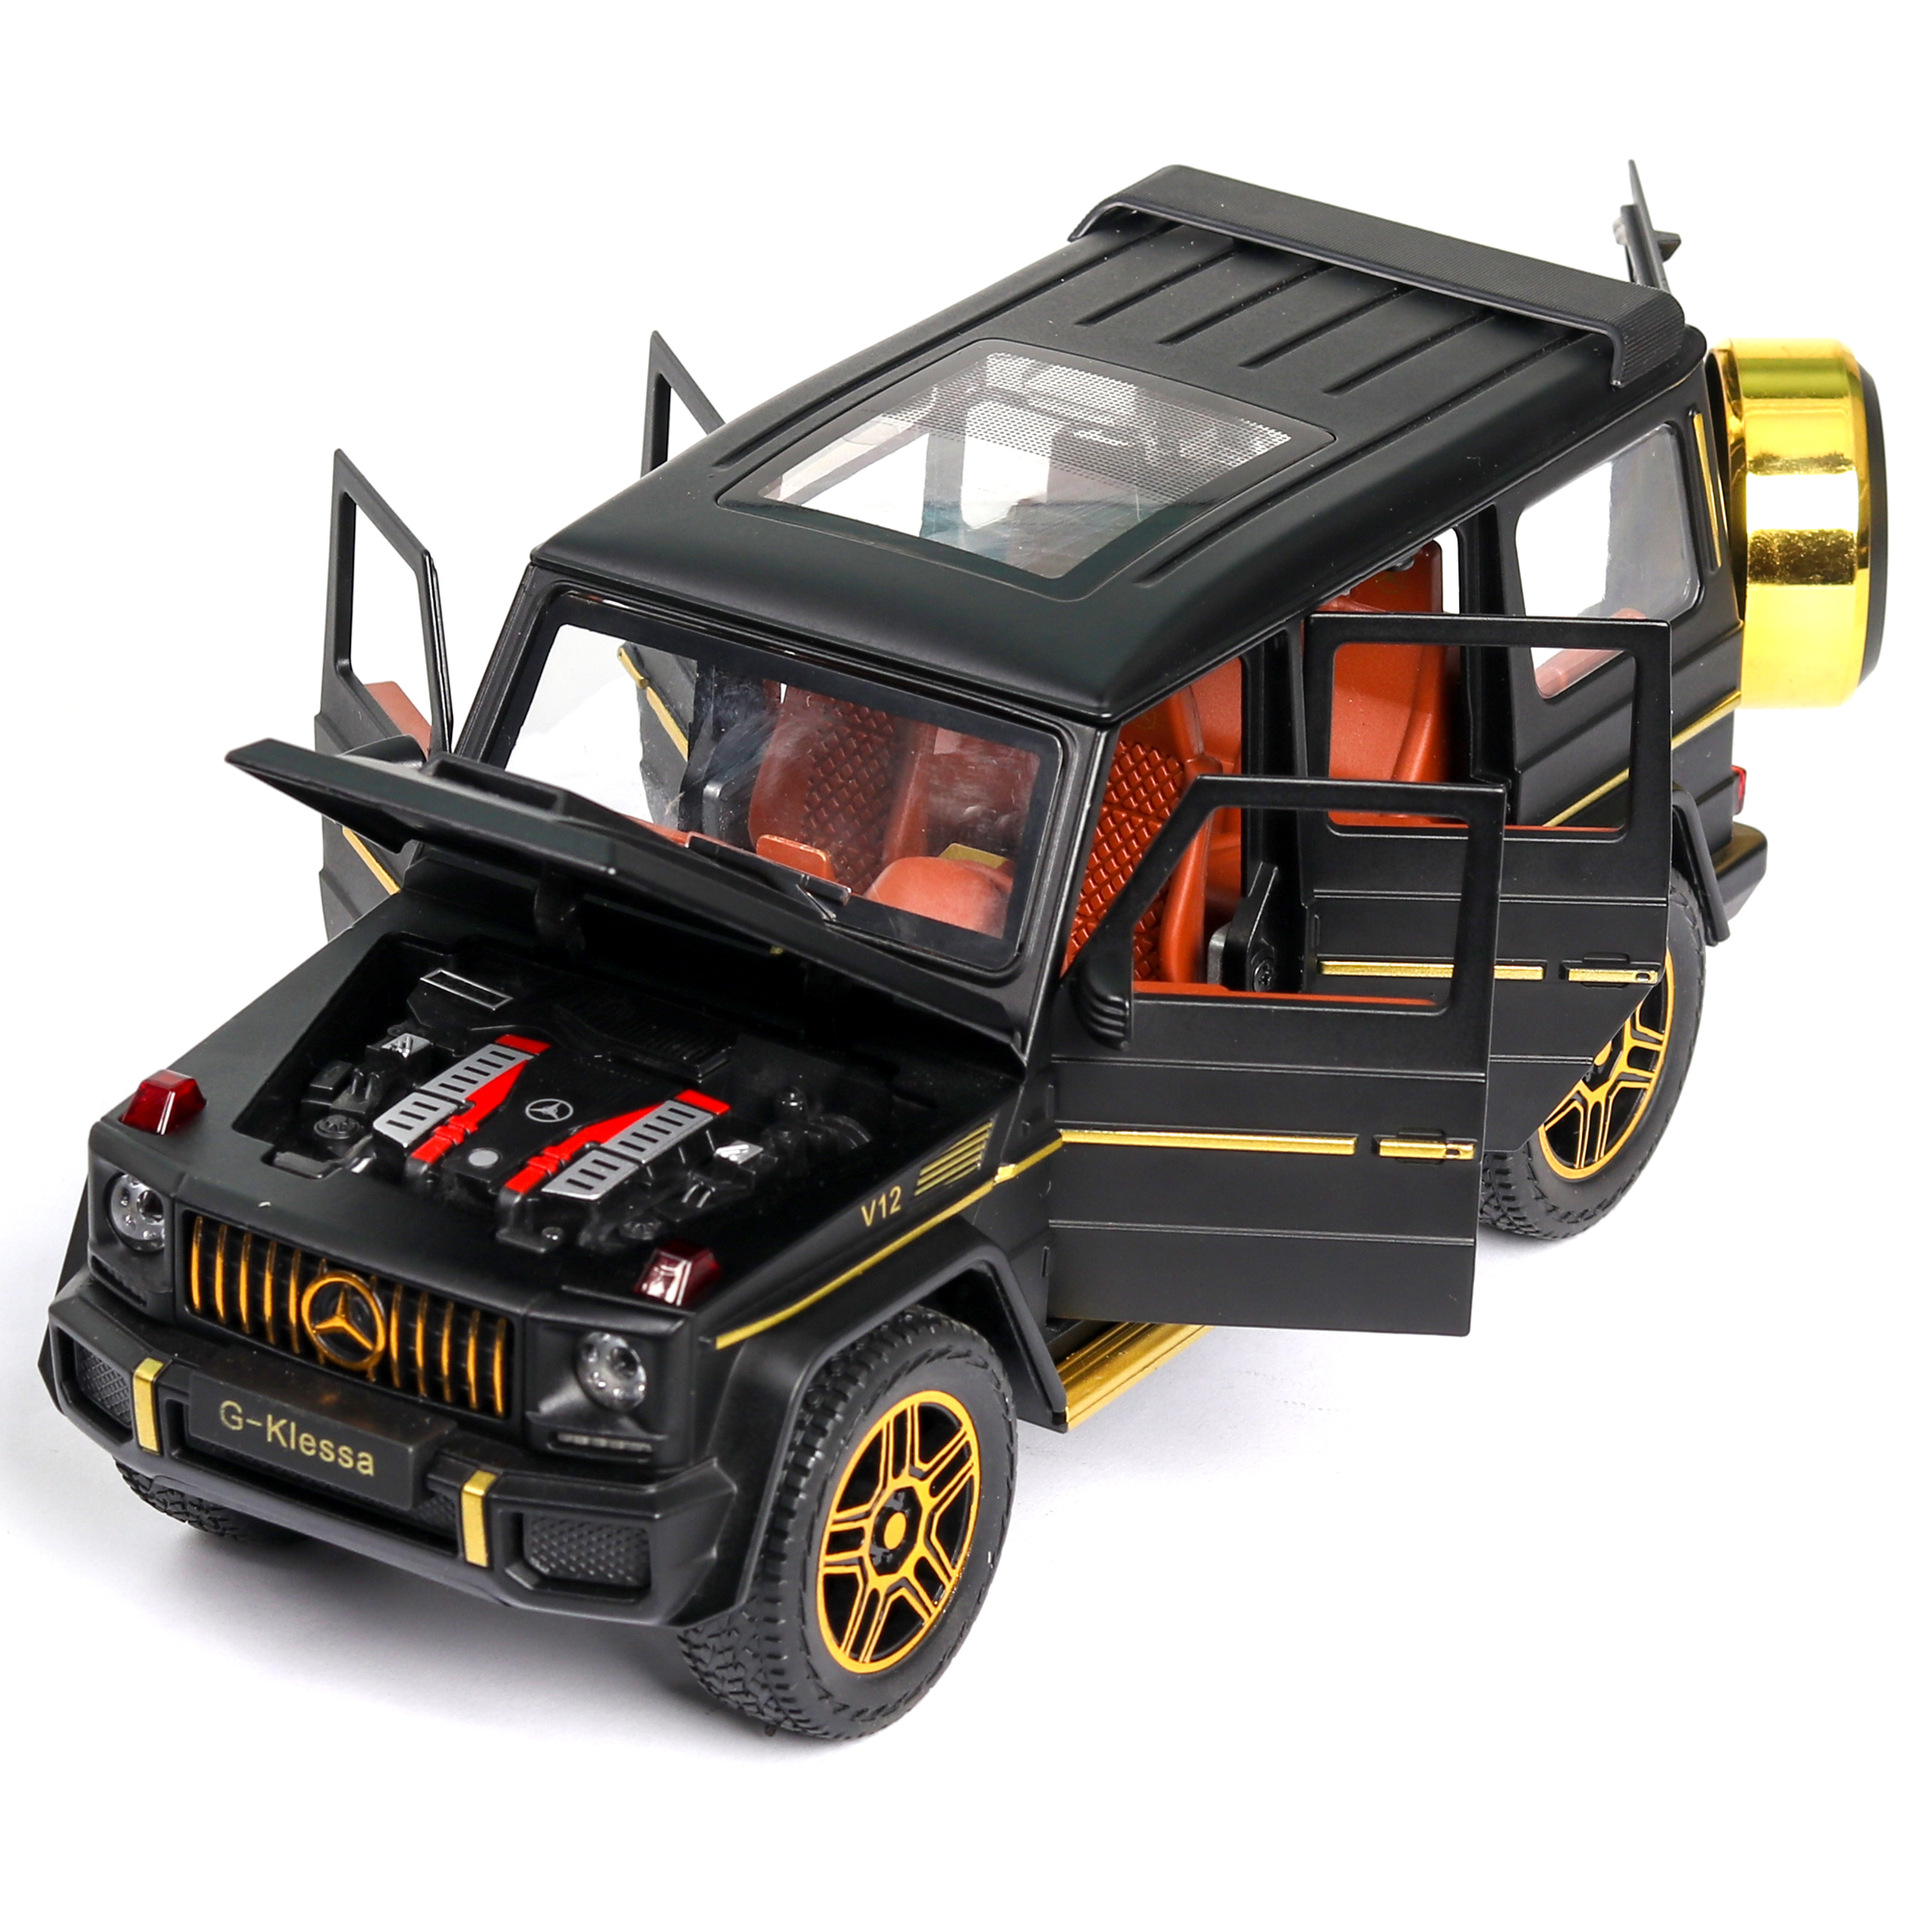 1:24 Toy Car Model Metal Wheels Simulation G65 Alloy Car Diecast Toy Vehicle Sound Light Pull Back Car Toys For Kids Gift